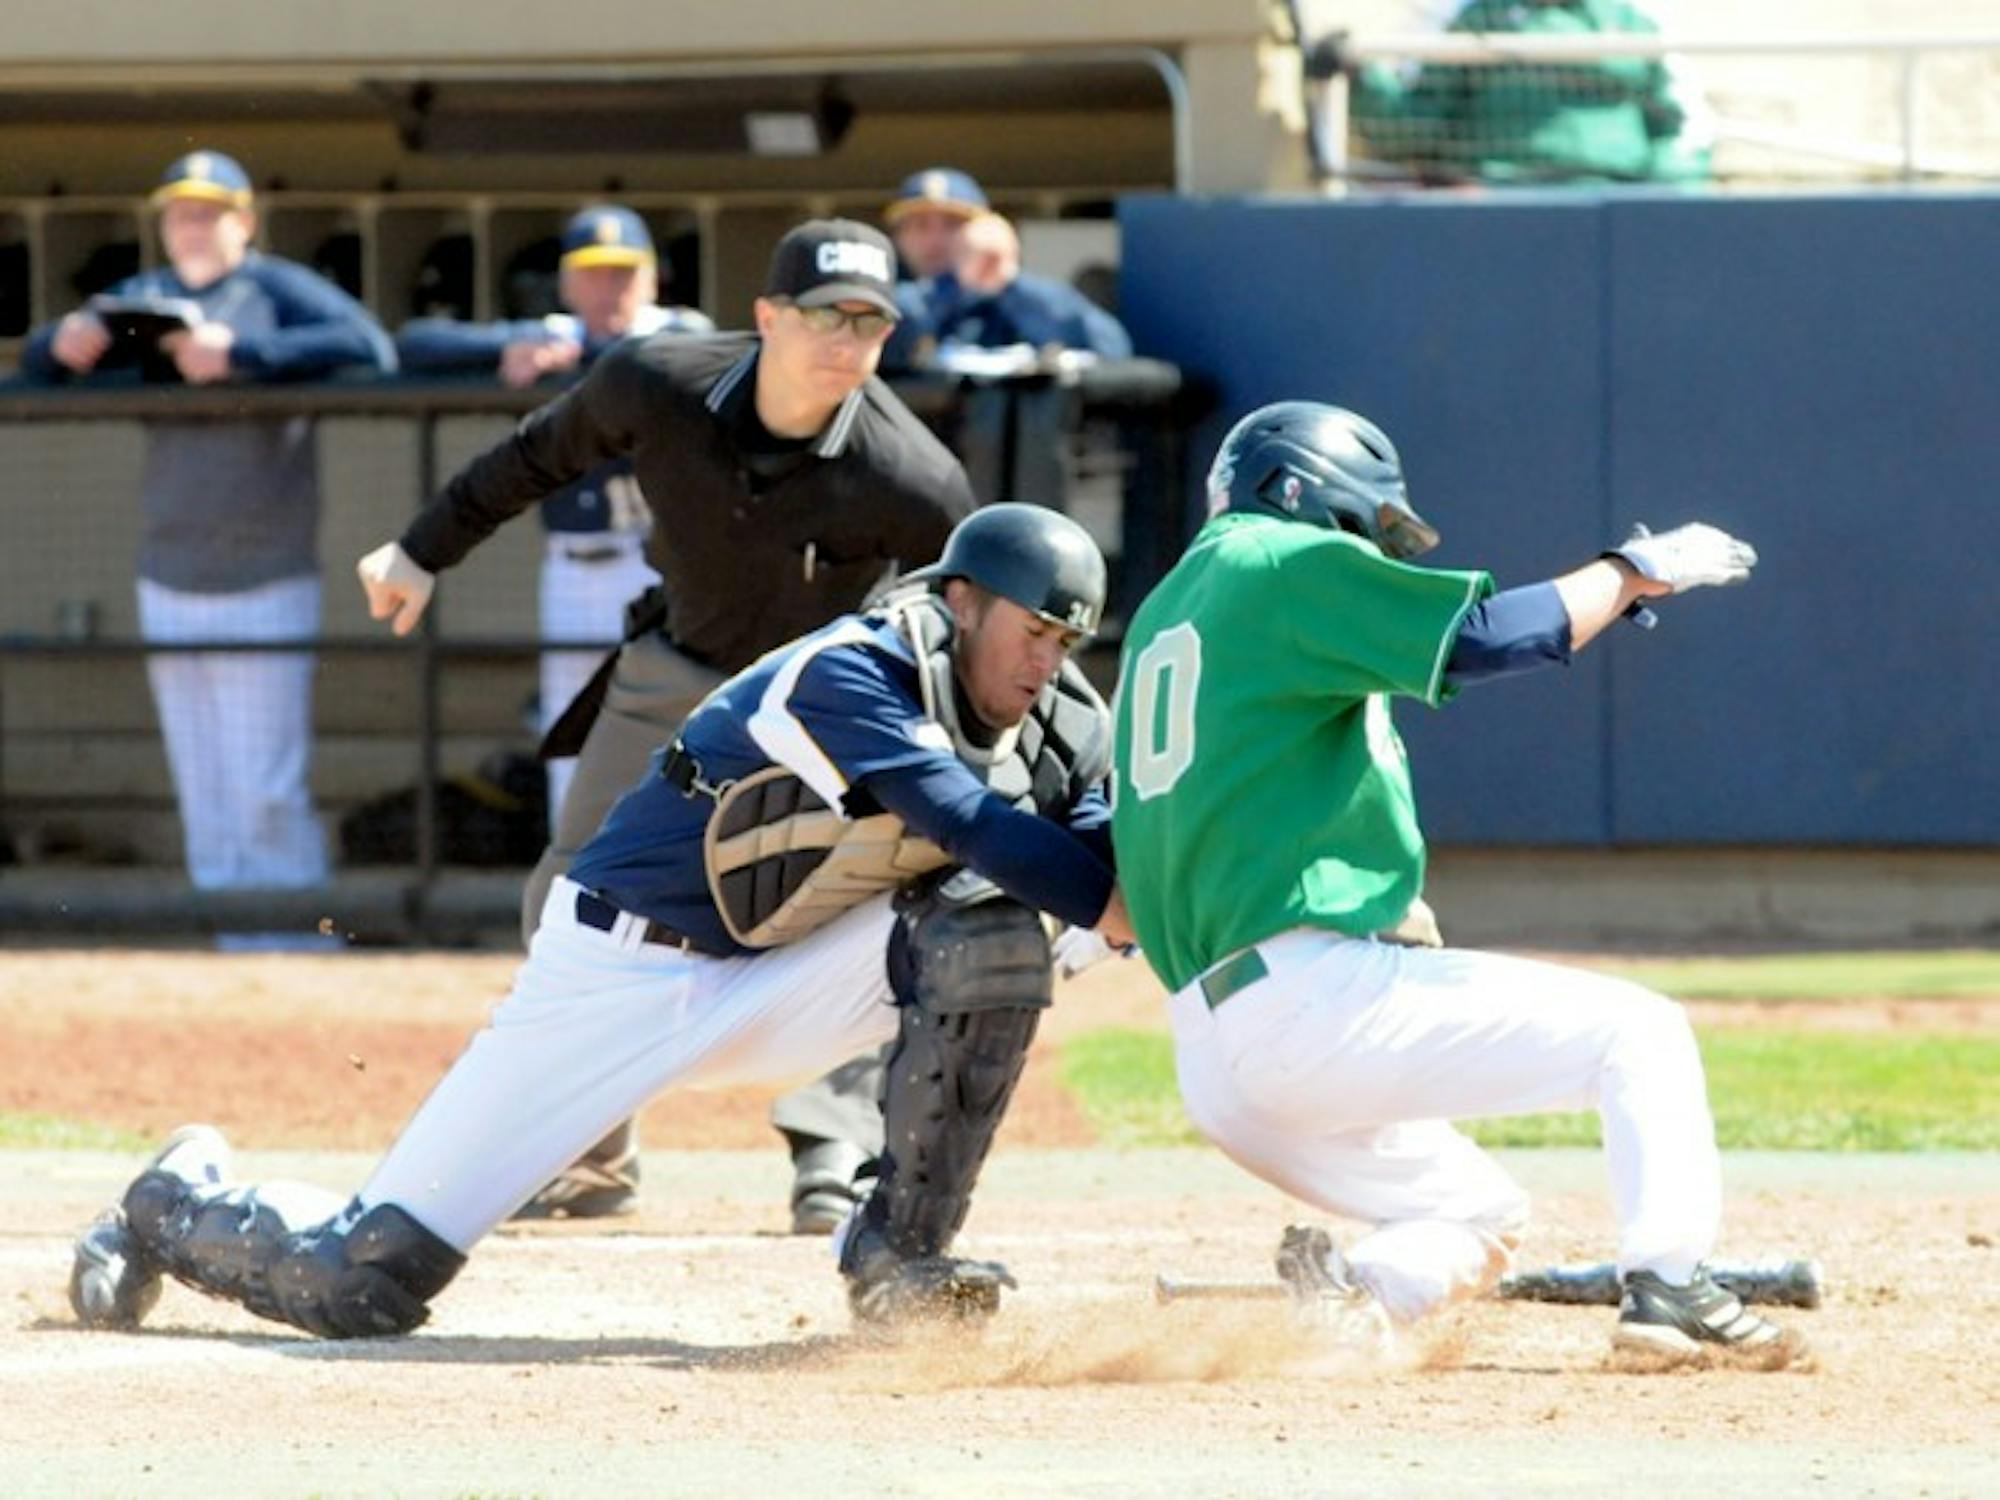 Irish junior Conor Biggio attempts to avoid the tag at the plate against Quinnipac on April 21, 2013, when Notre Dame claimed a 5-1 victory. This season, Biggio shares the team lead with seven stolen bases.